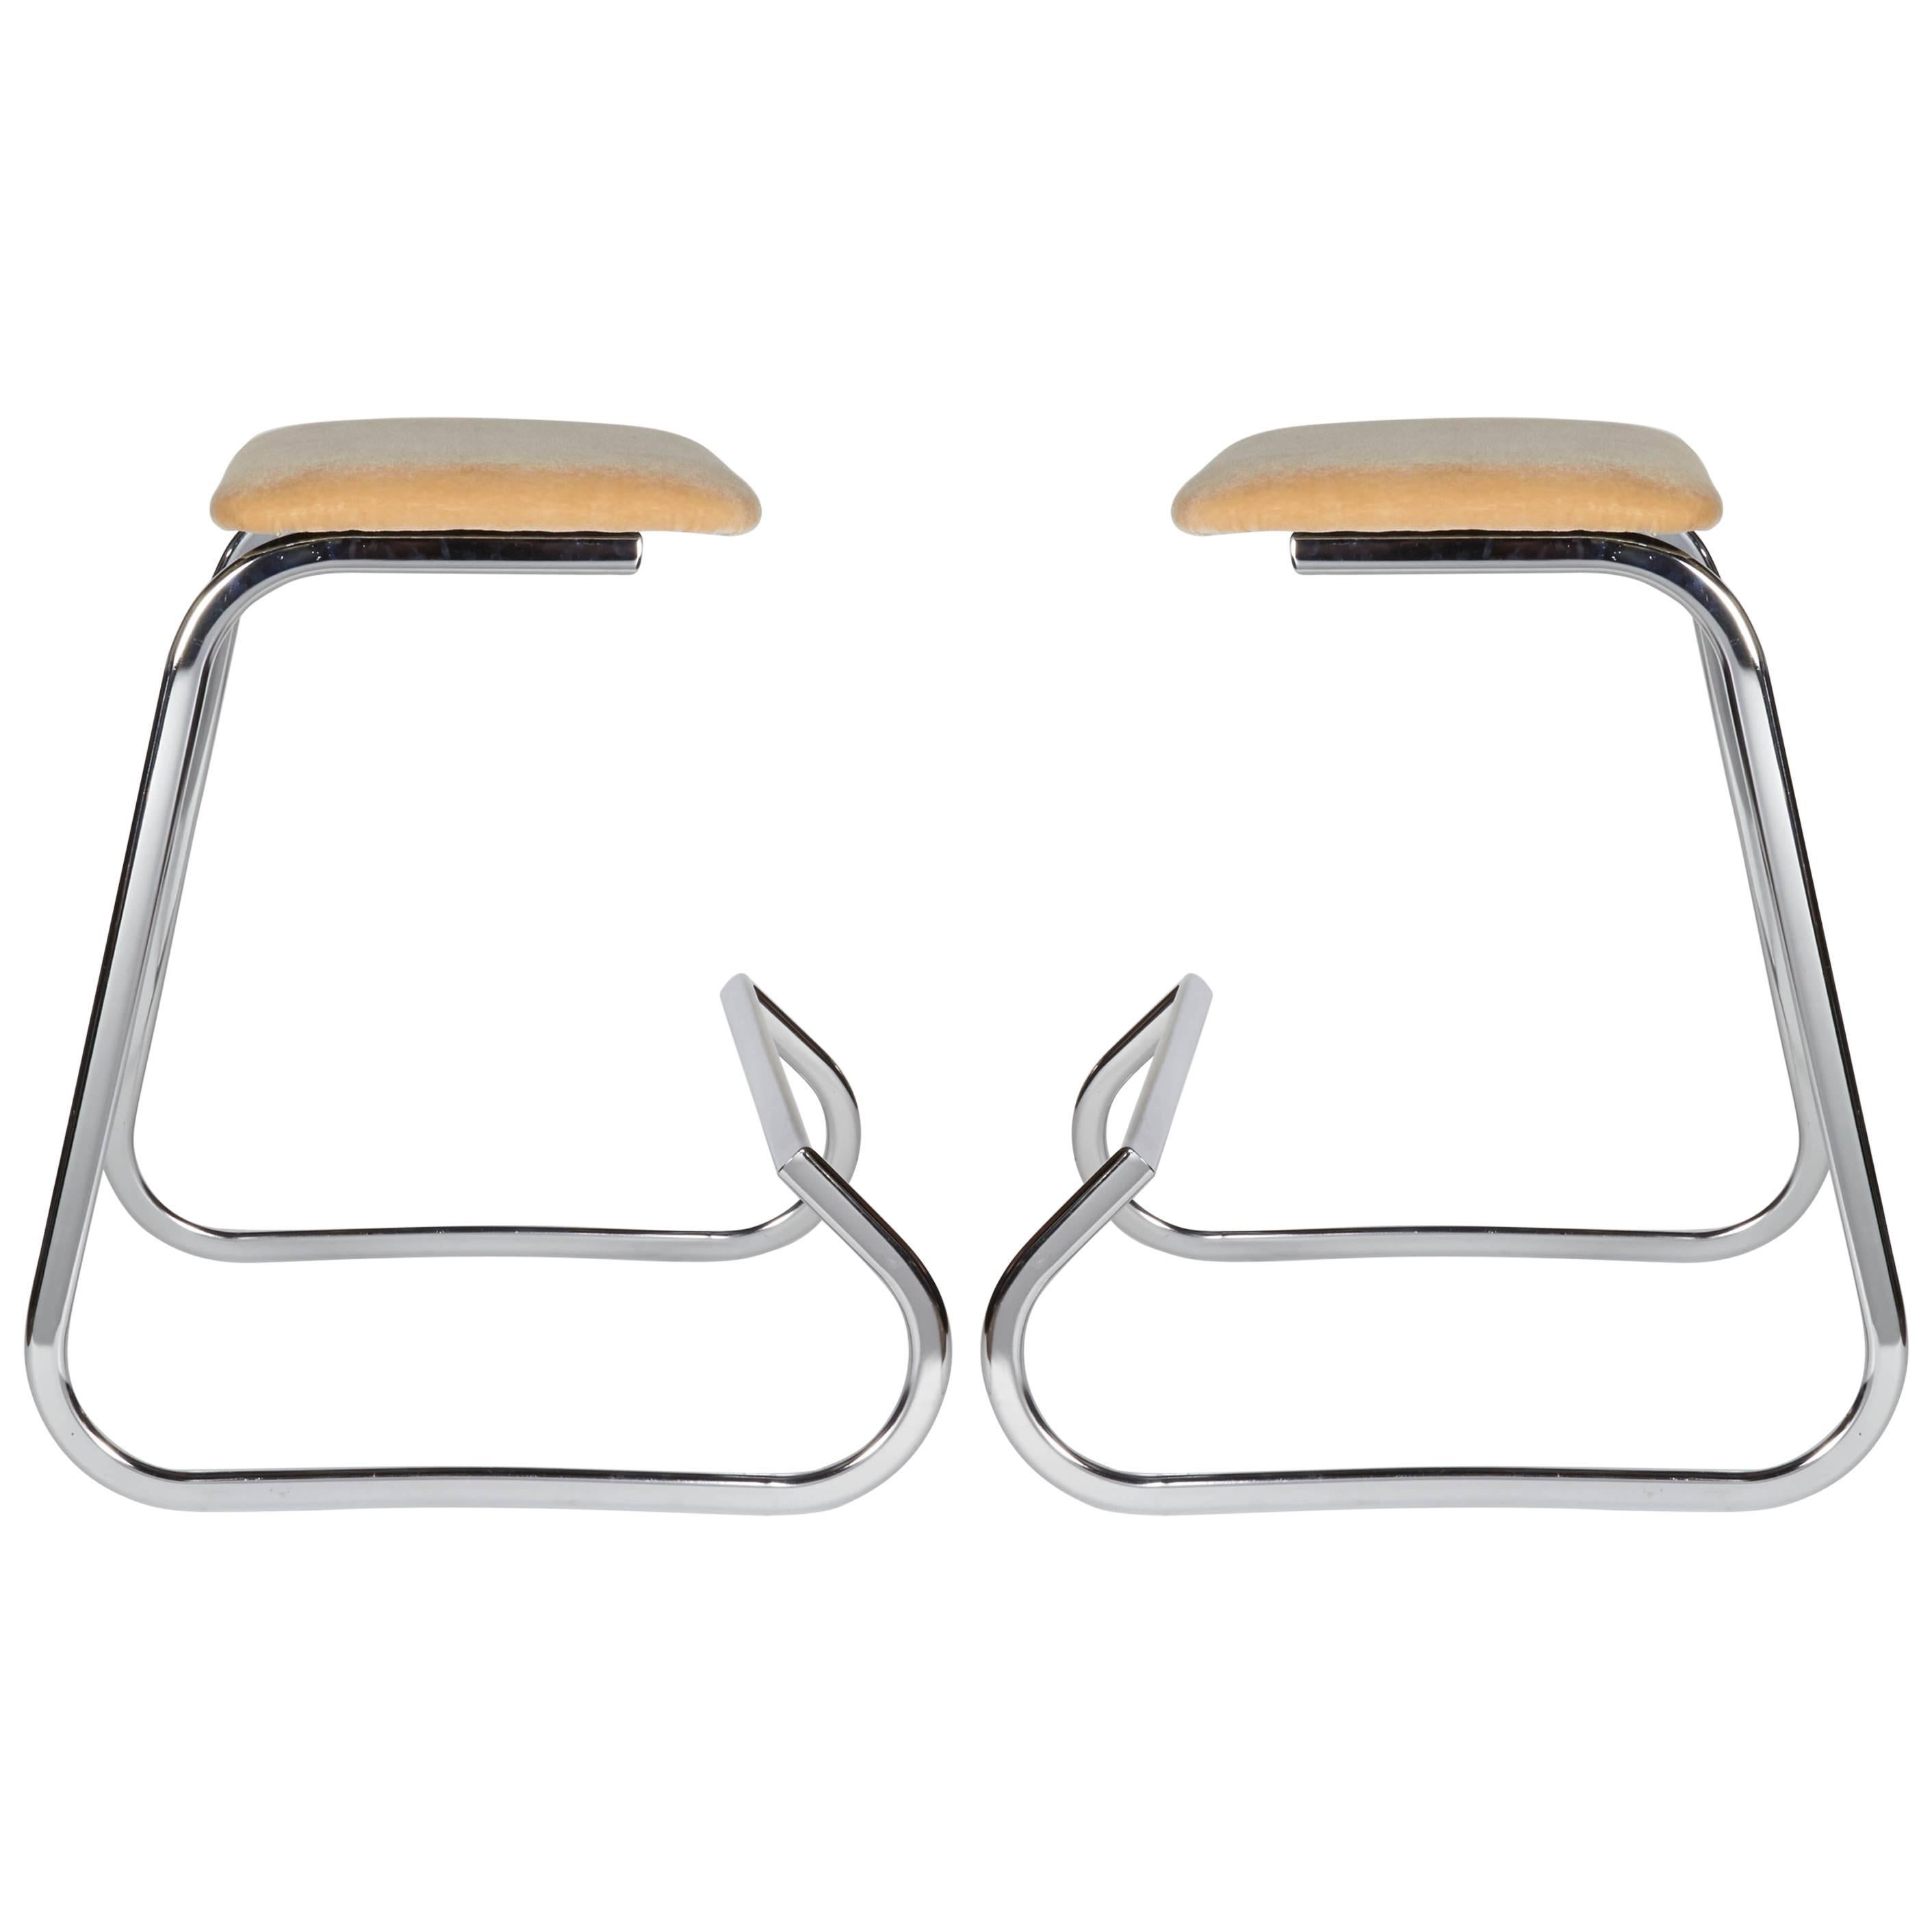 Pair of Luxe Mid-Century Modern Bar Stools by Charles Stendig